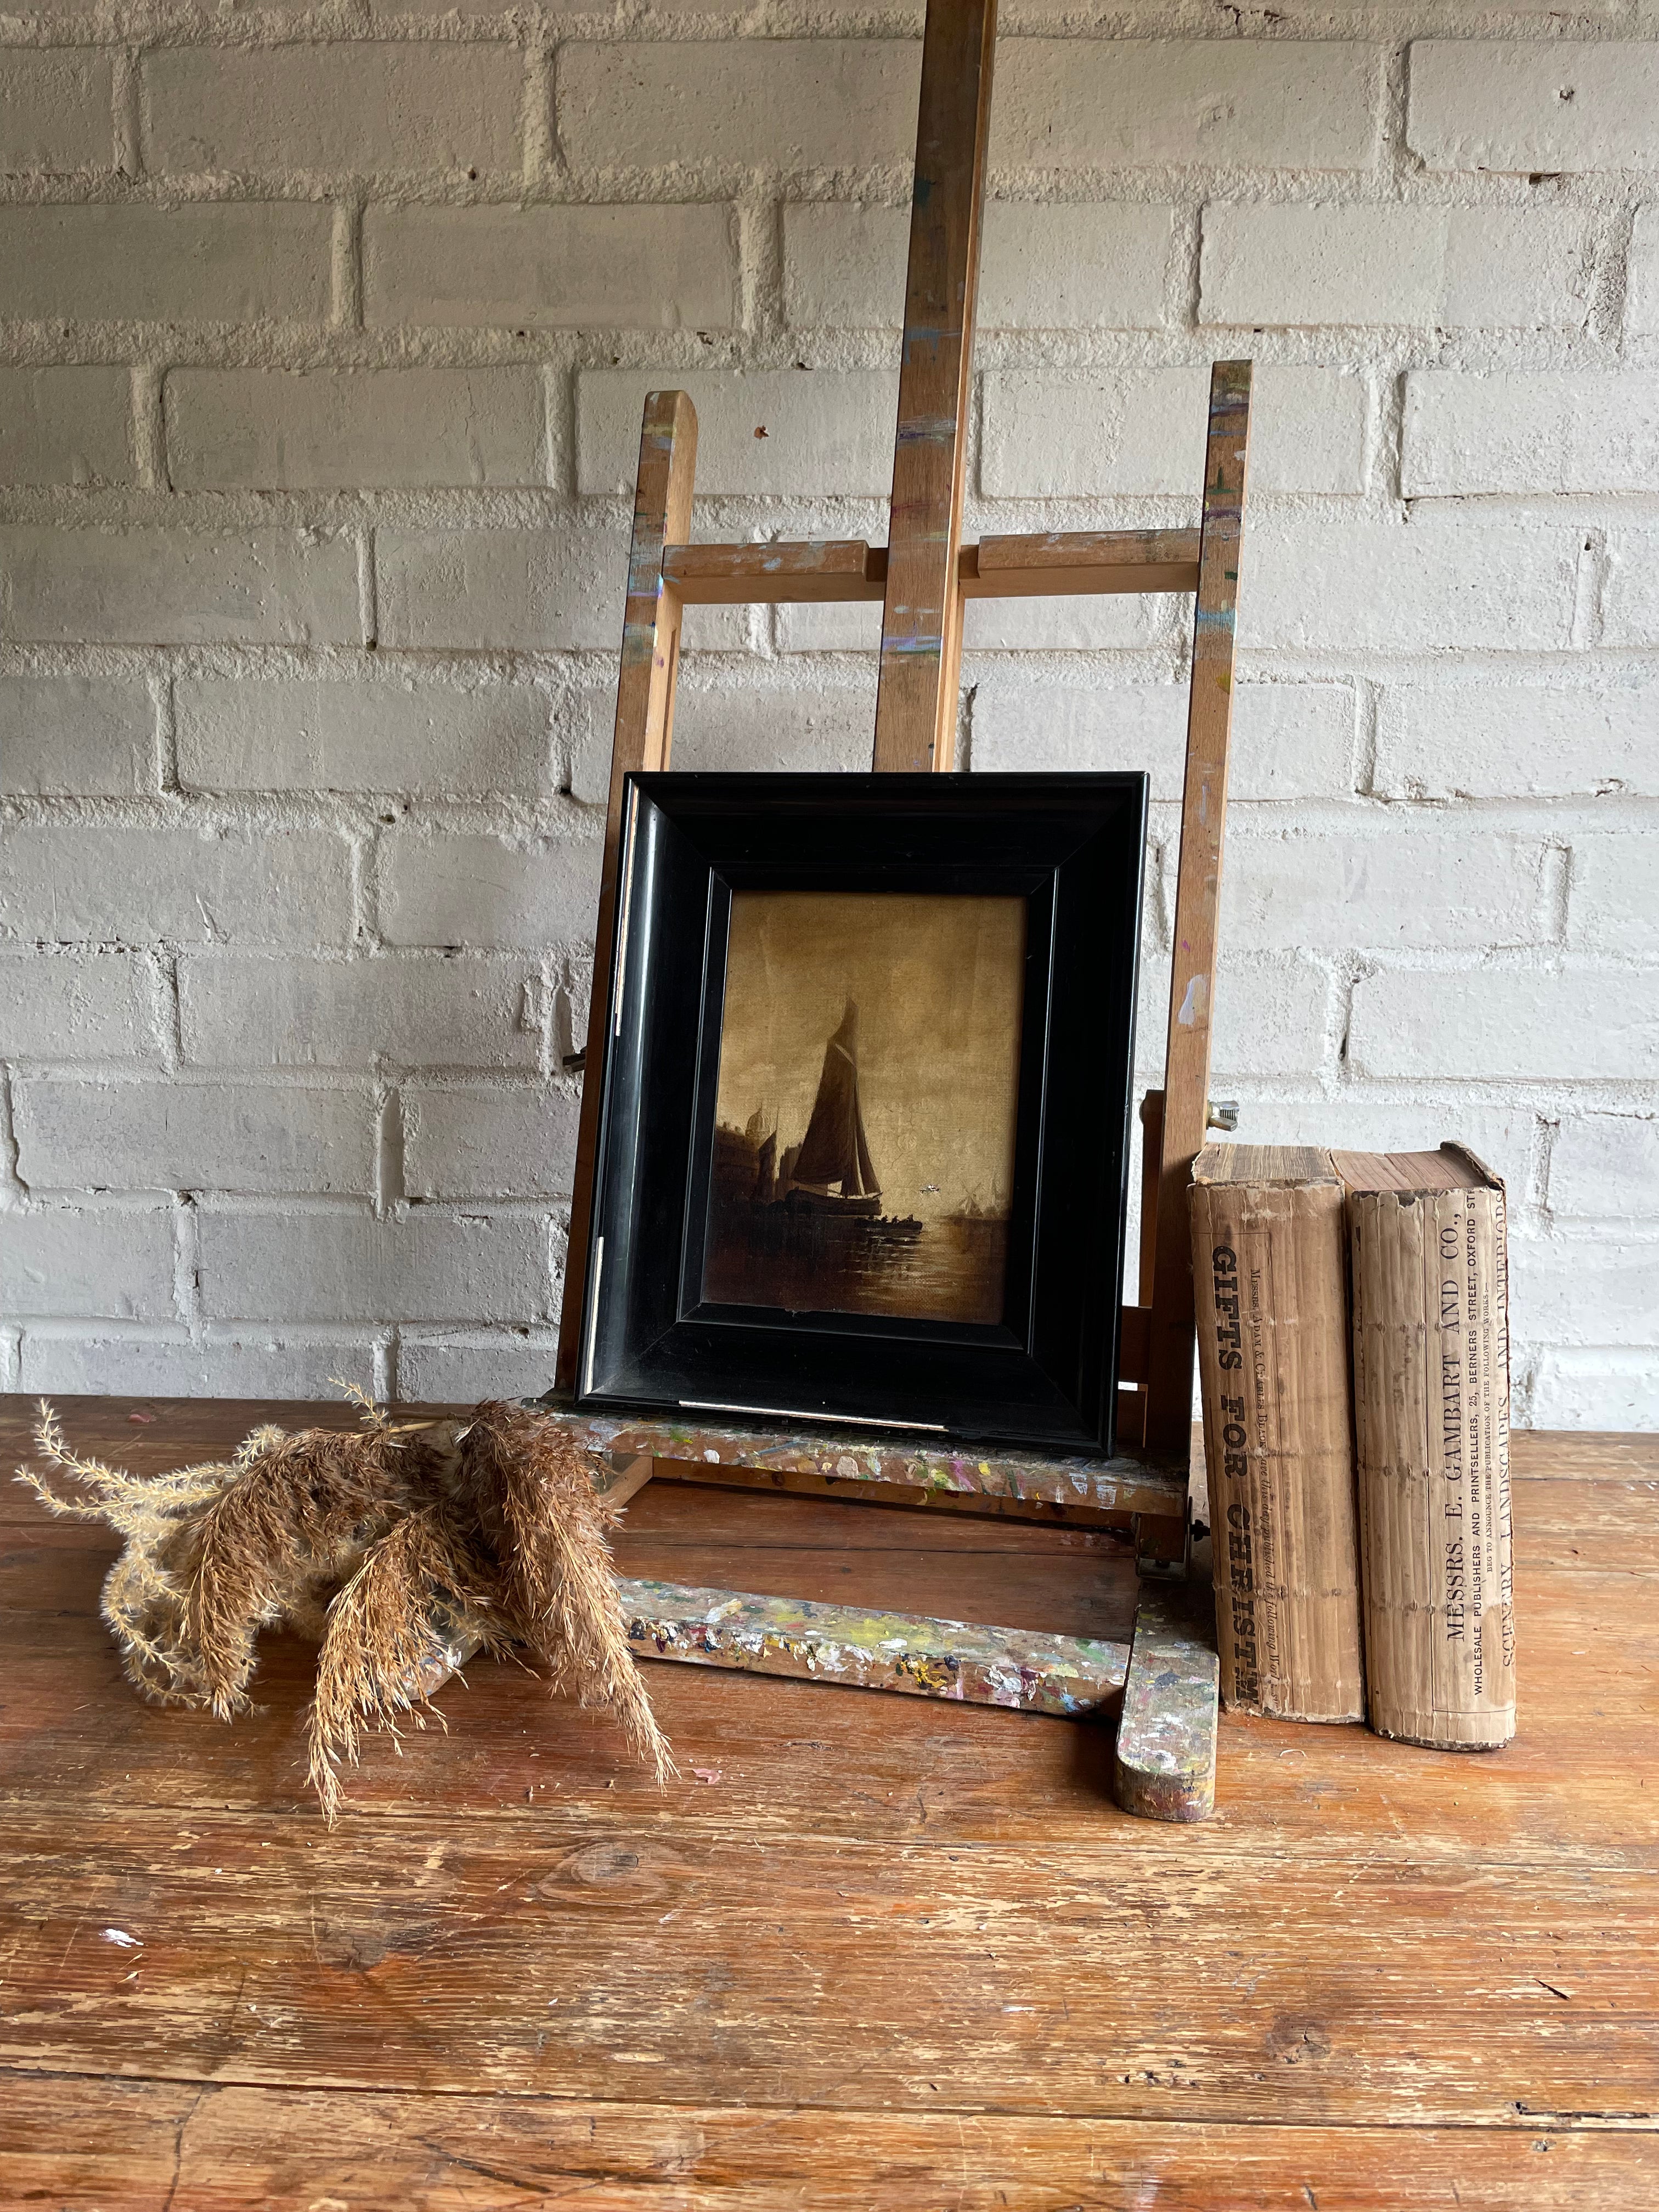 Antique Dutch Oil Painting with Sailing Boat